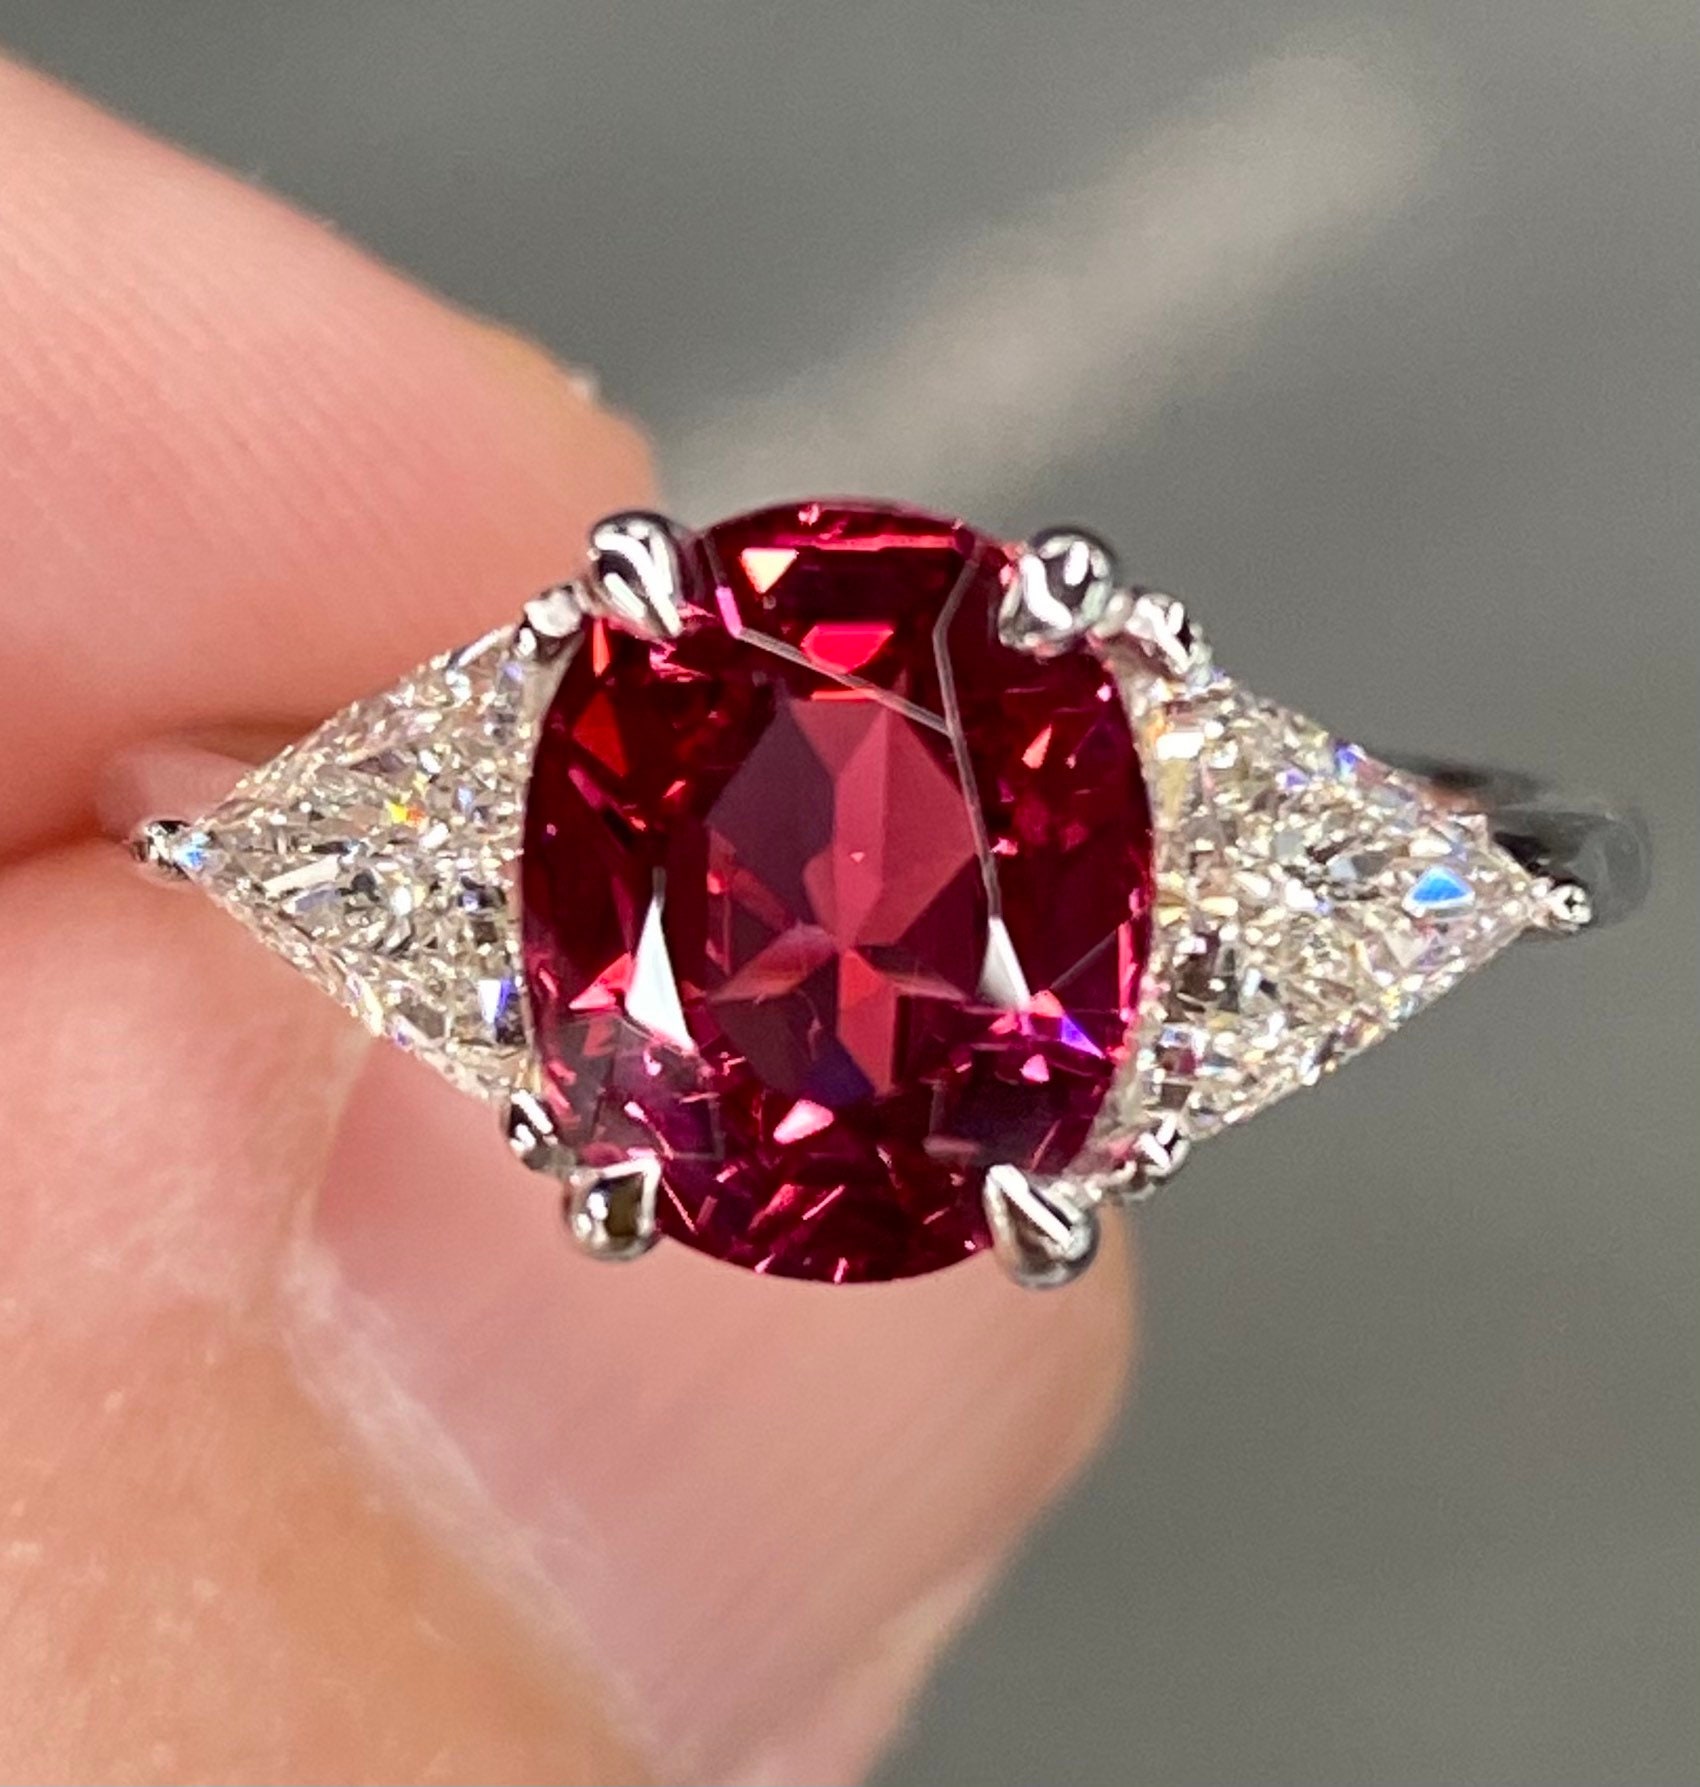 2.51 CTW Bright Pink Sapphire and Diamond Ring in 14K White Gold